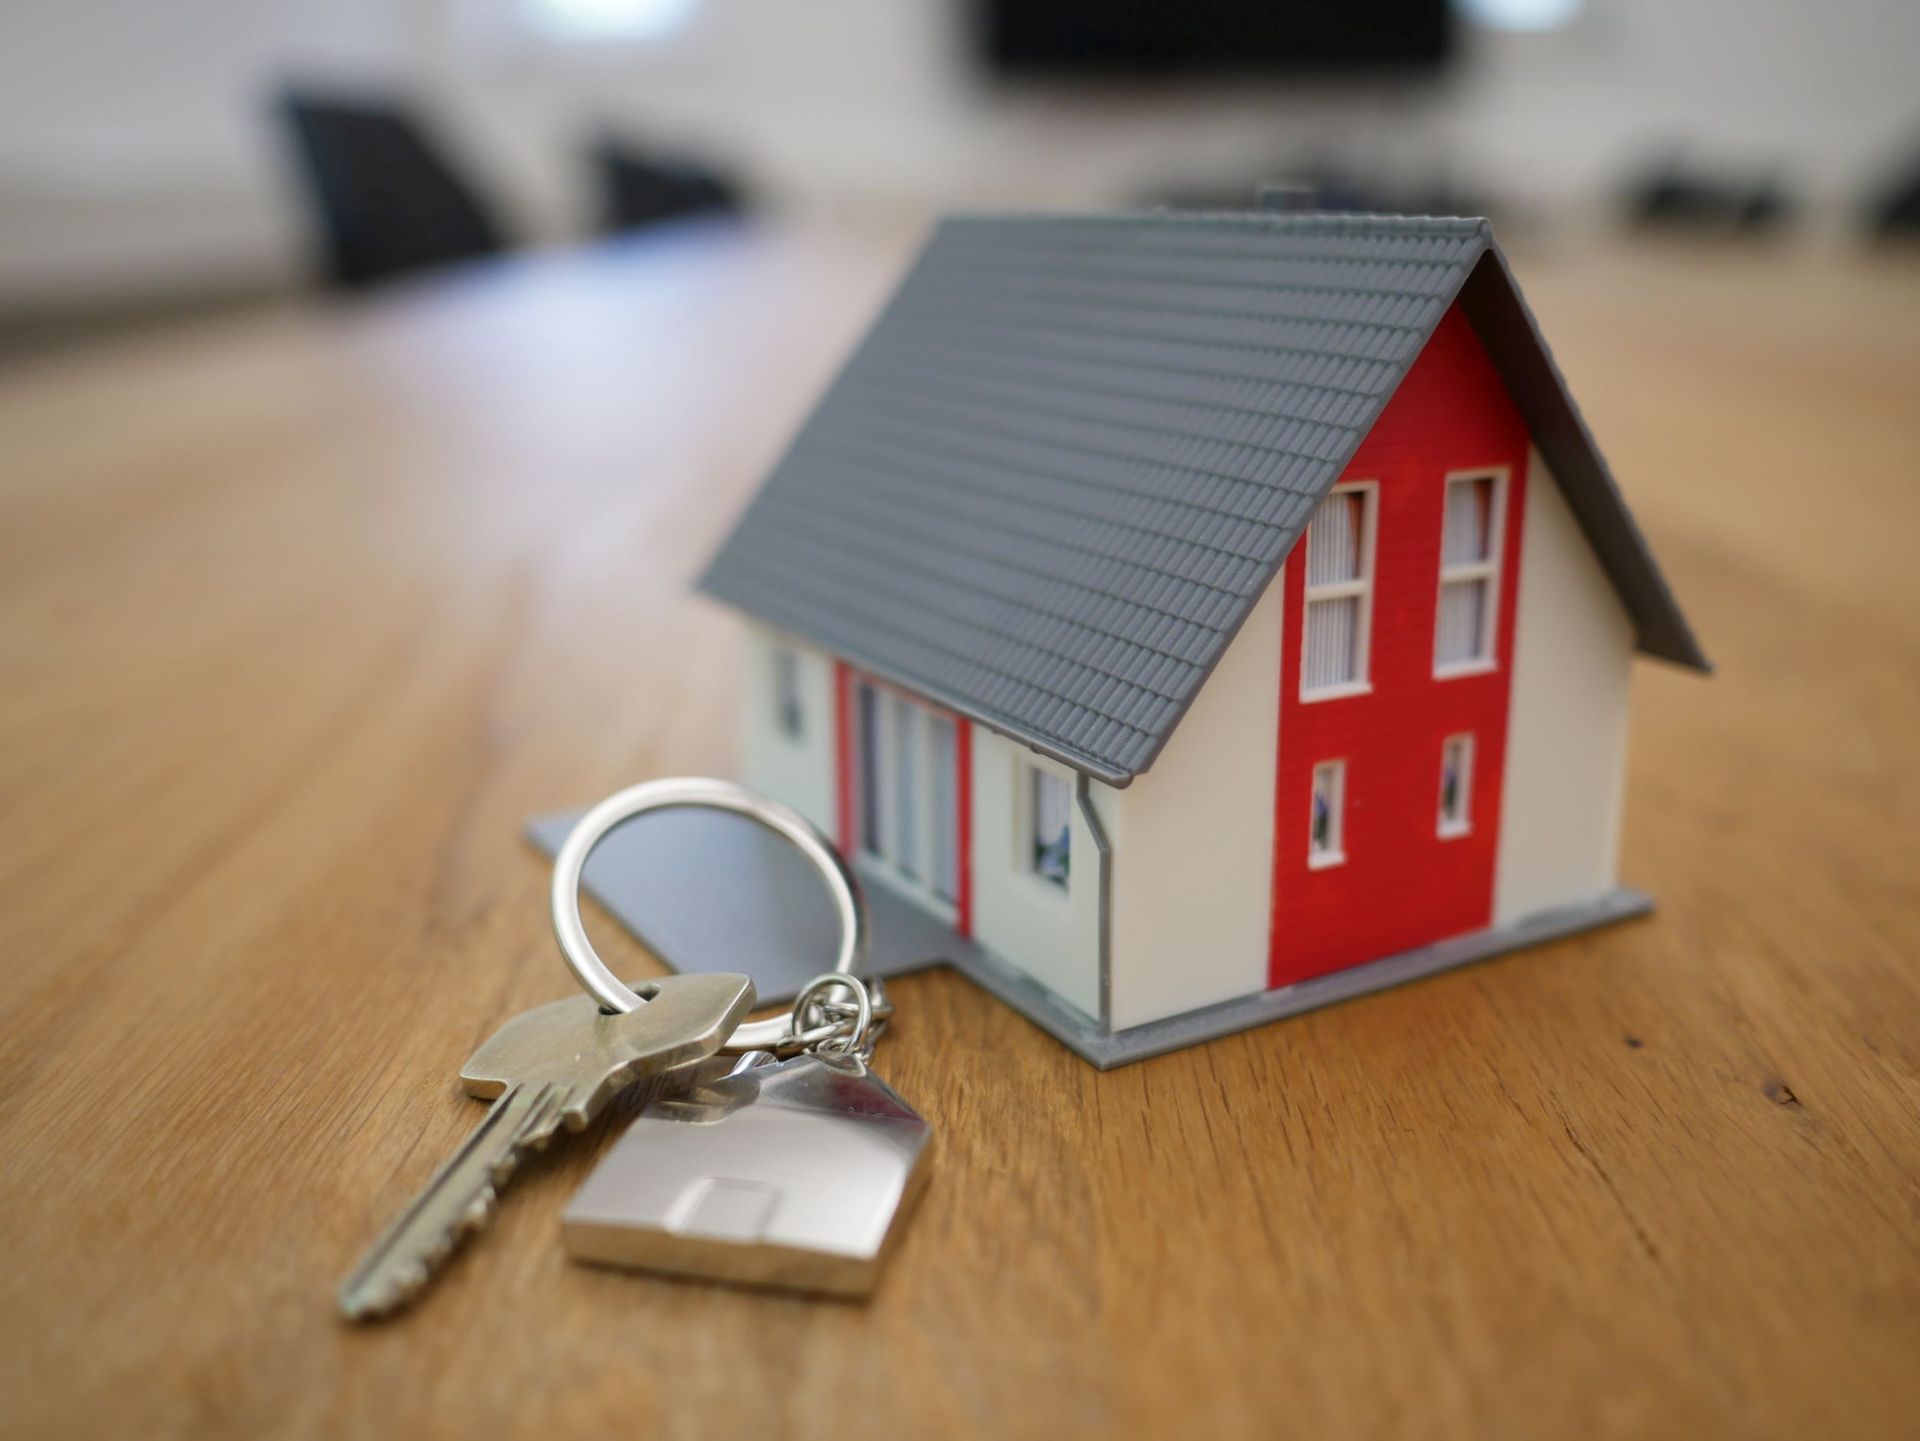 Small model of a home with a key and keychain